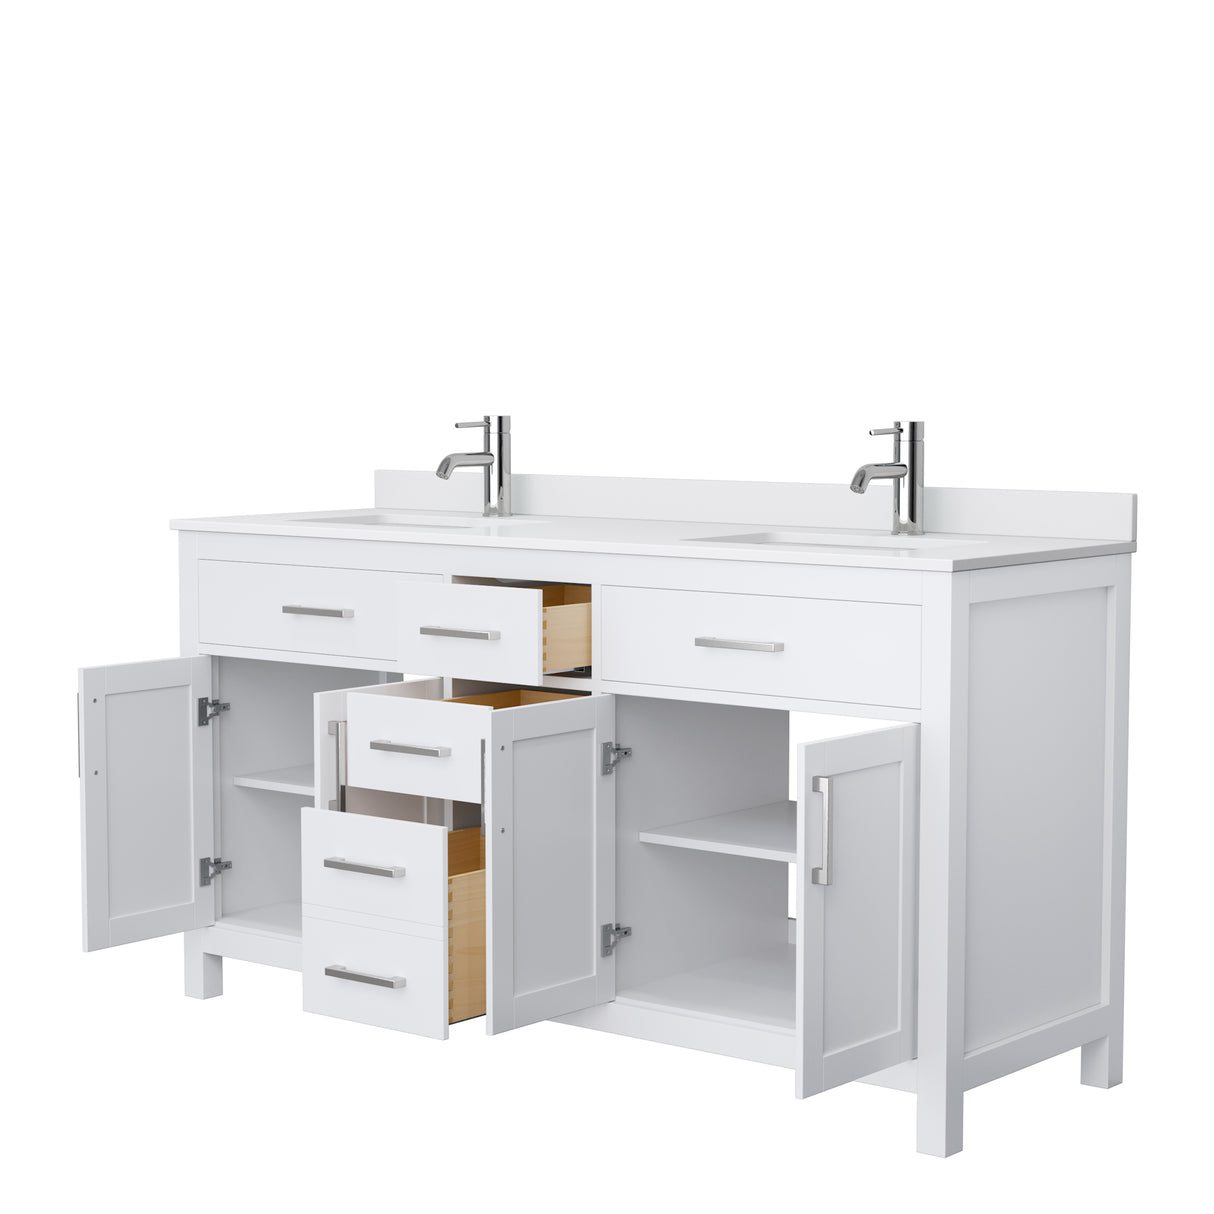 Beckett 66 Inch Double Bathroom Vanity in White White Cultured Marble Countertop Undermount Square Sinks No Mirror